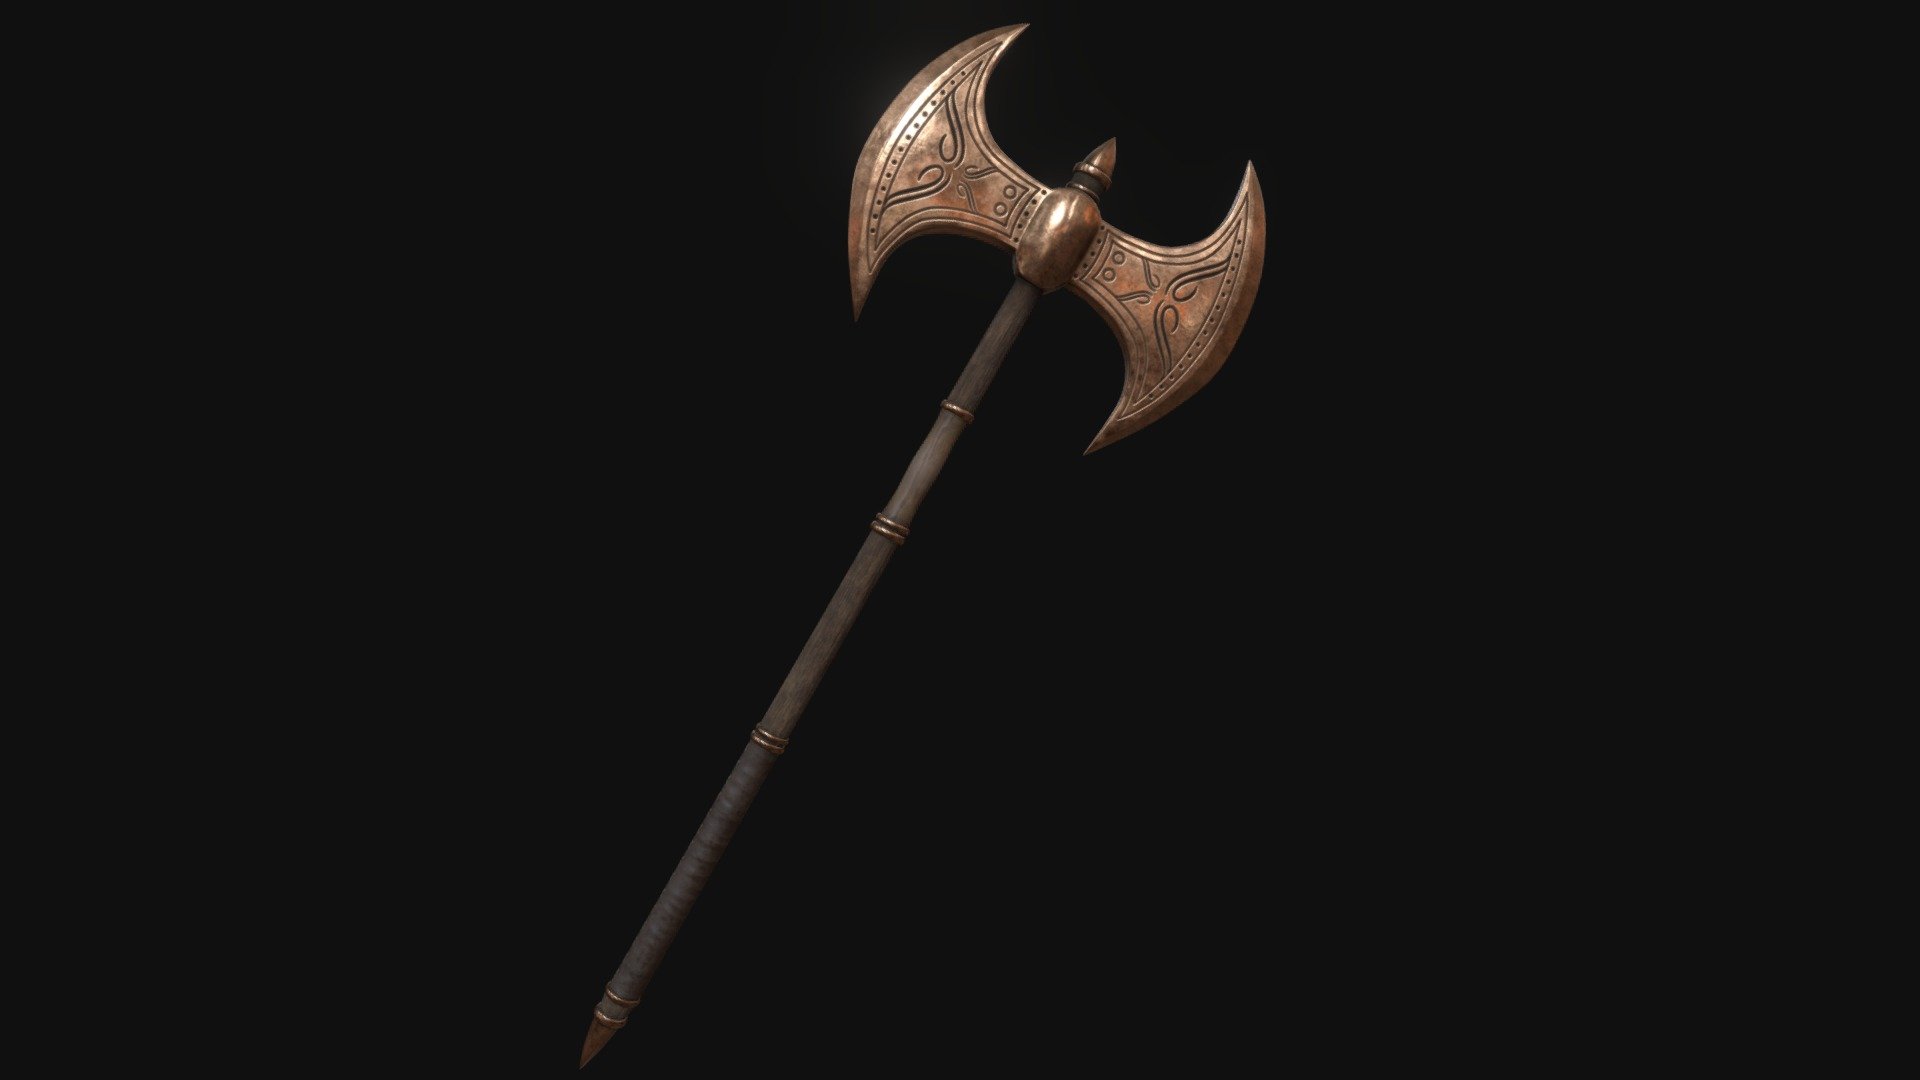 Greek Axe - Labrys

Textures in 4k, FBX file format.

Modeled in Blender, textured in Substance.

Visit my Artstation for more renders and option to buy

Like, follow and stay tuned for more models!
 - Greek Labrys (Axe) - 3D model by burning_umbrella (@burningumbrella69) 3d model